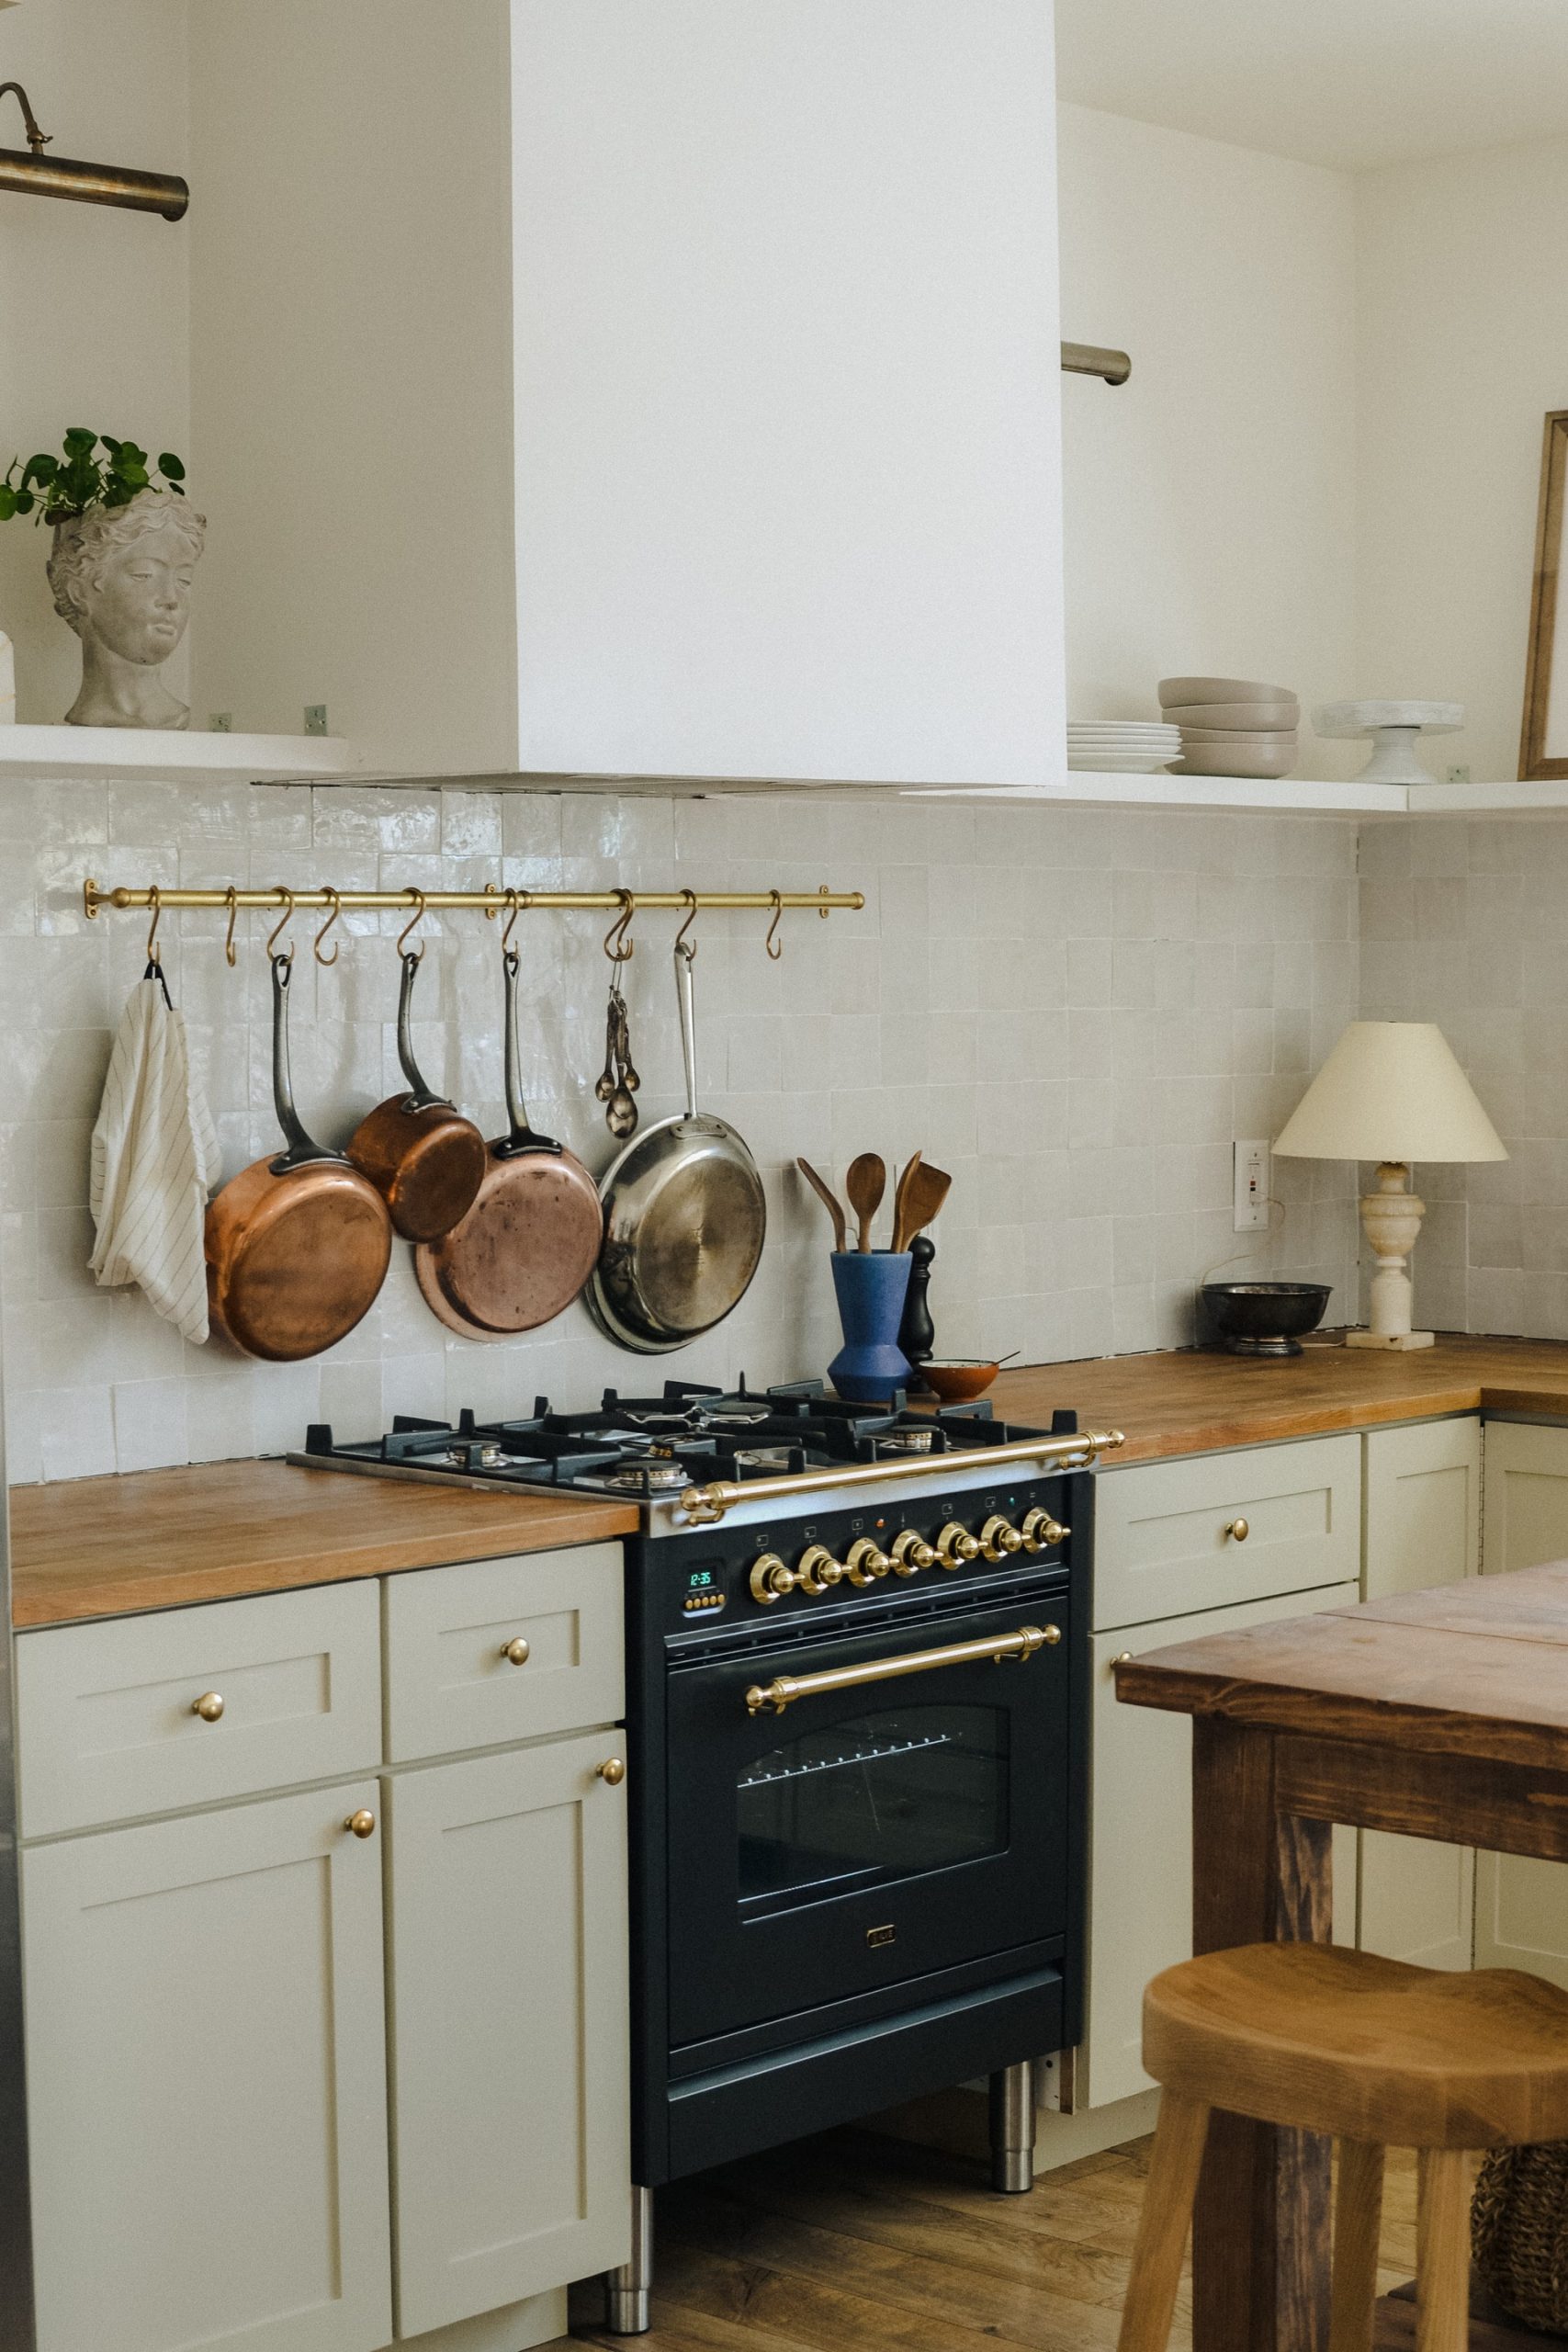 A kitchen with a black and gold oven